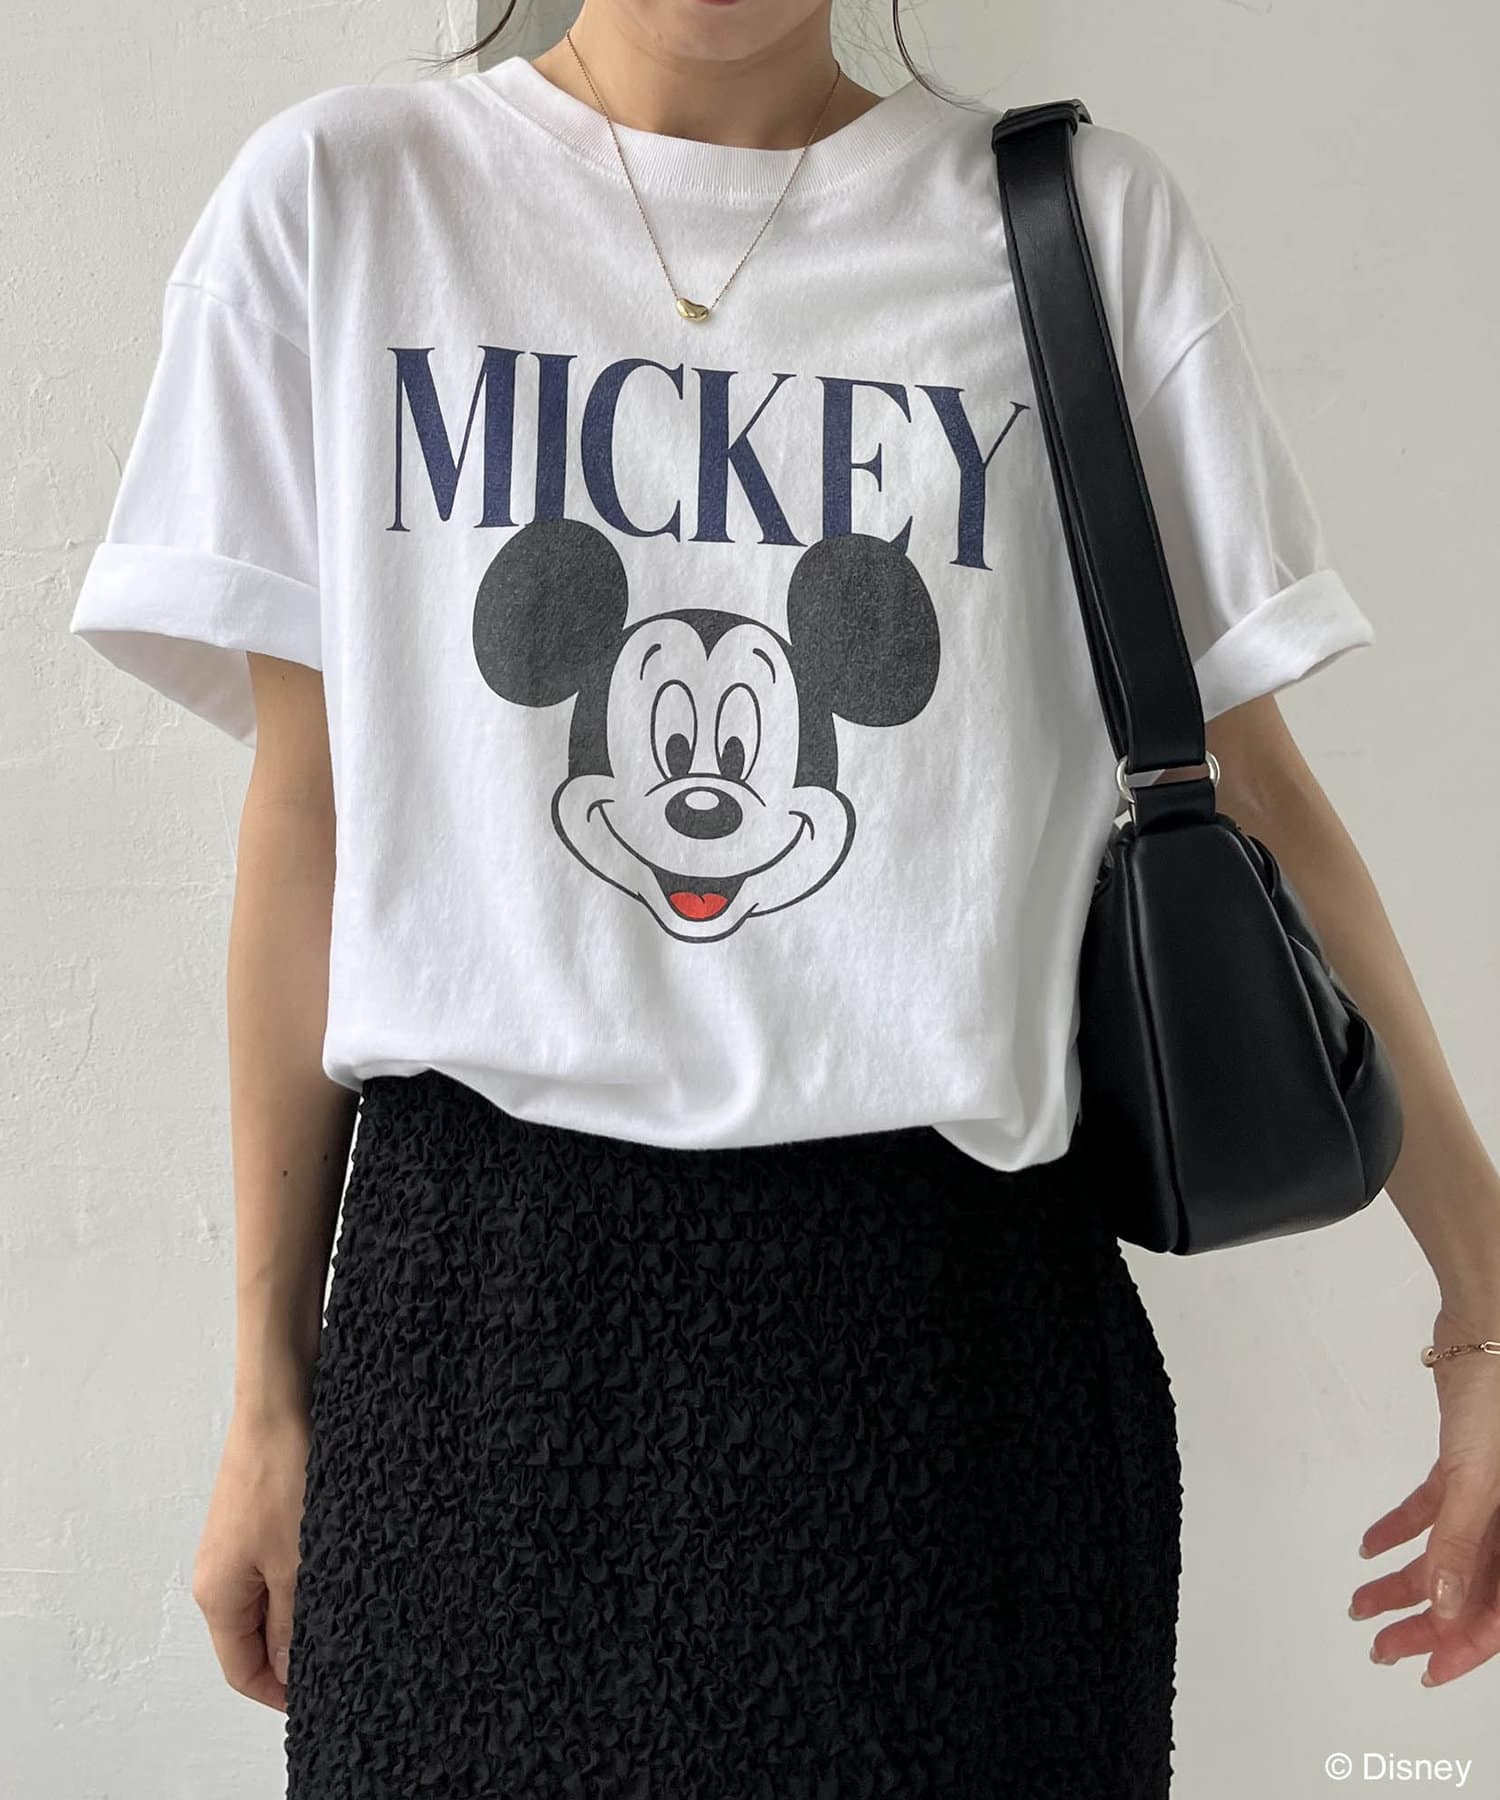 GOOD ROCK SPEED〉MICKEY Tシャツ | CAPRICIEUX LE'MAGE(カプリシュレ 